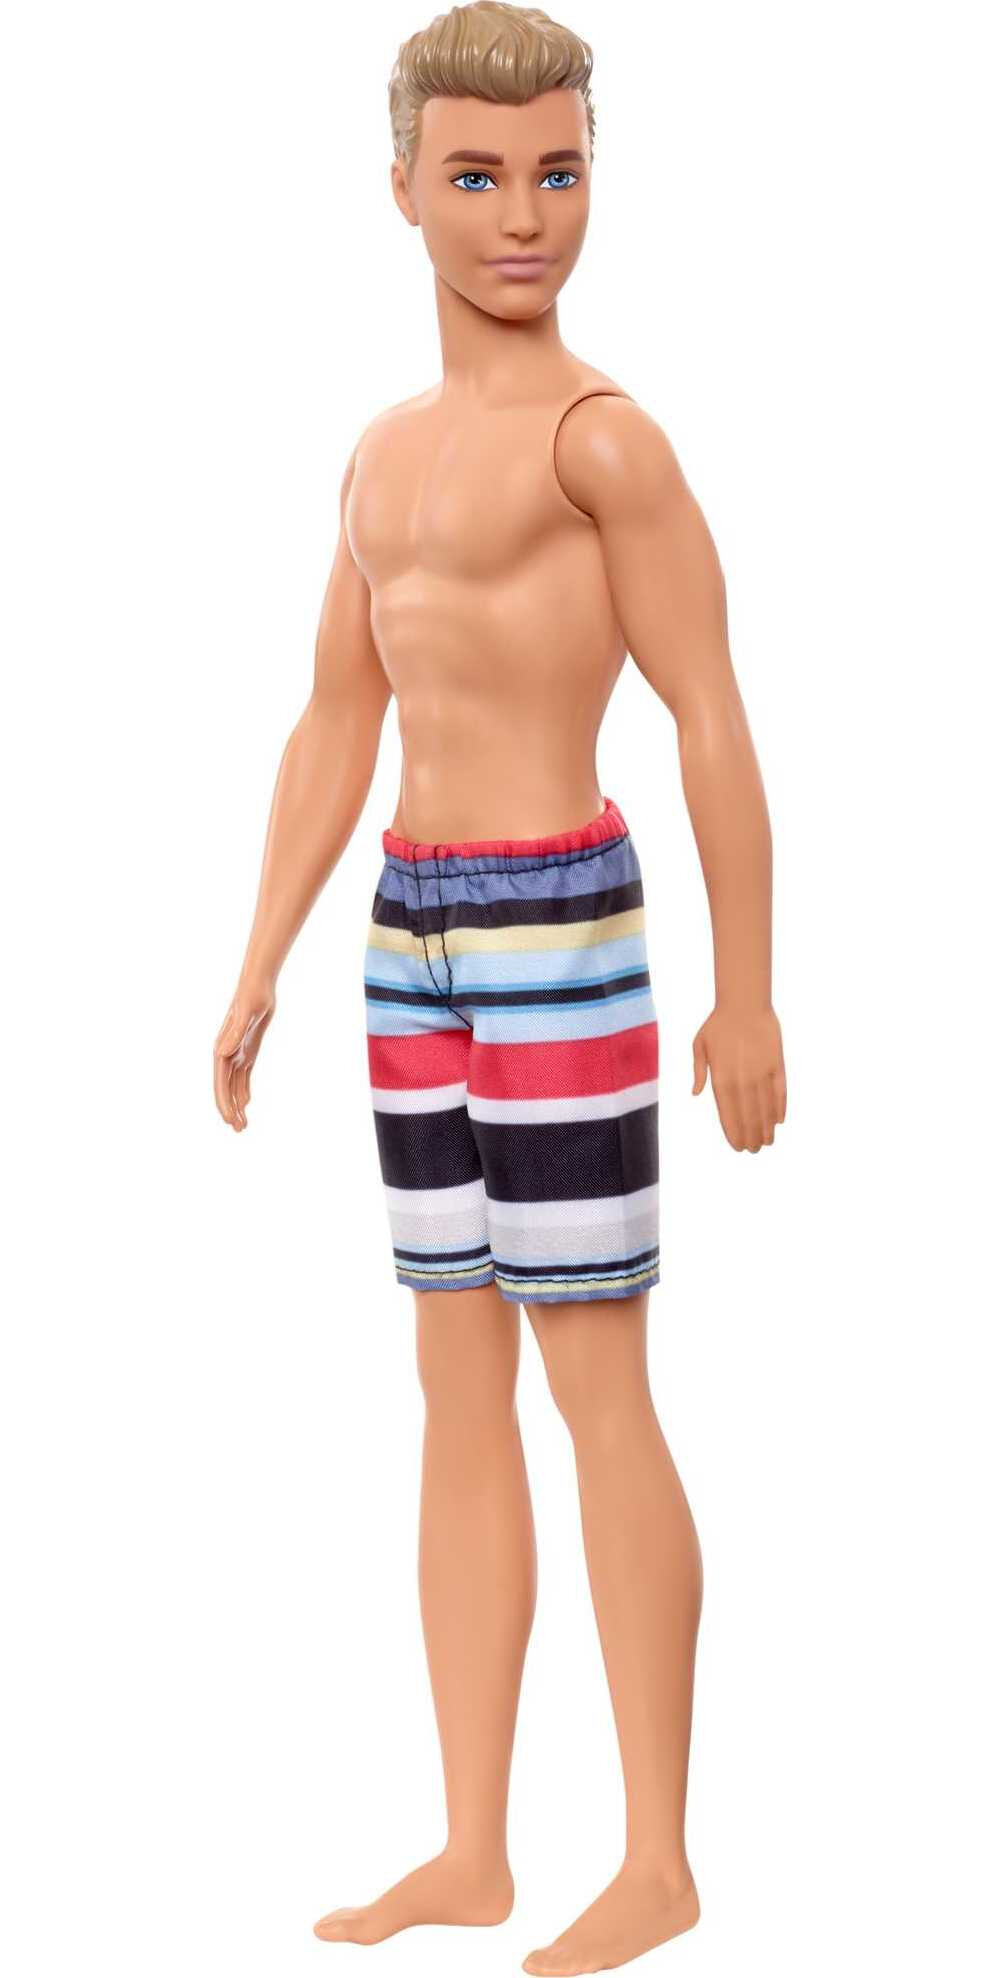 Barbie Ken Beach Doll with Blonde Hair & Striped Swimsuit - image 1 of 5